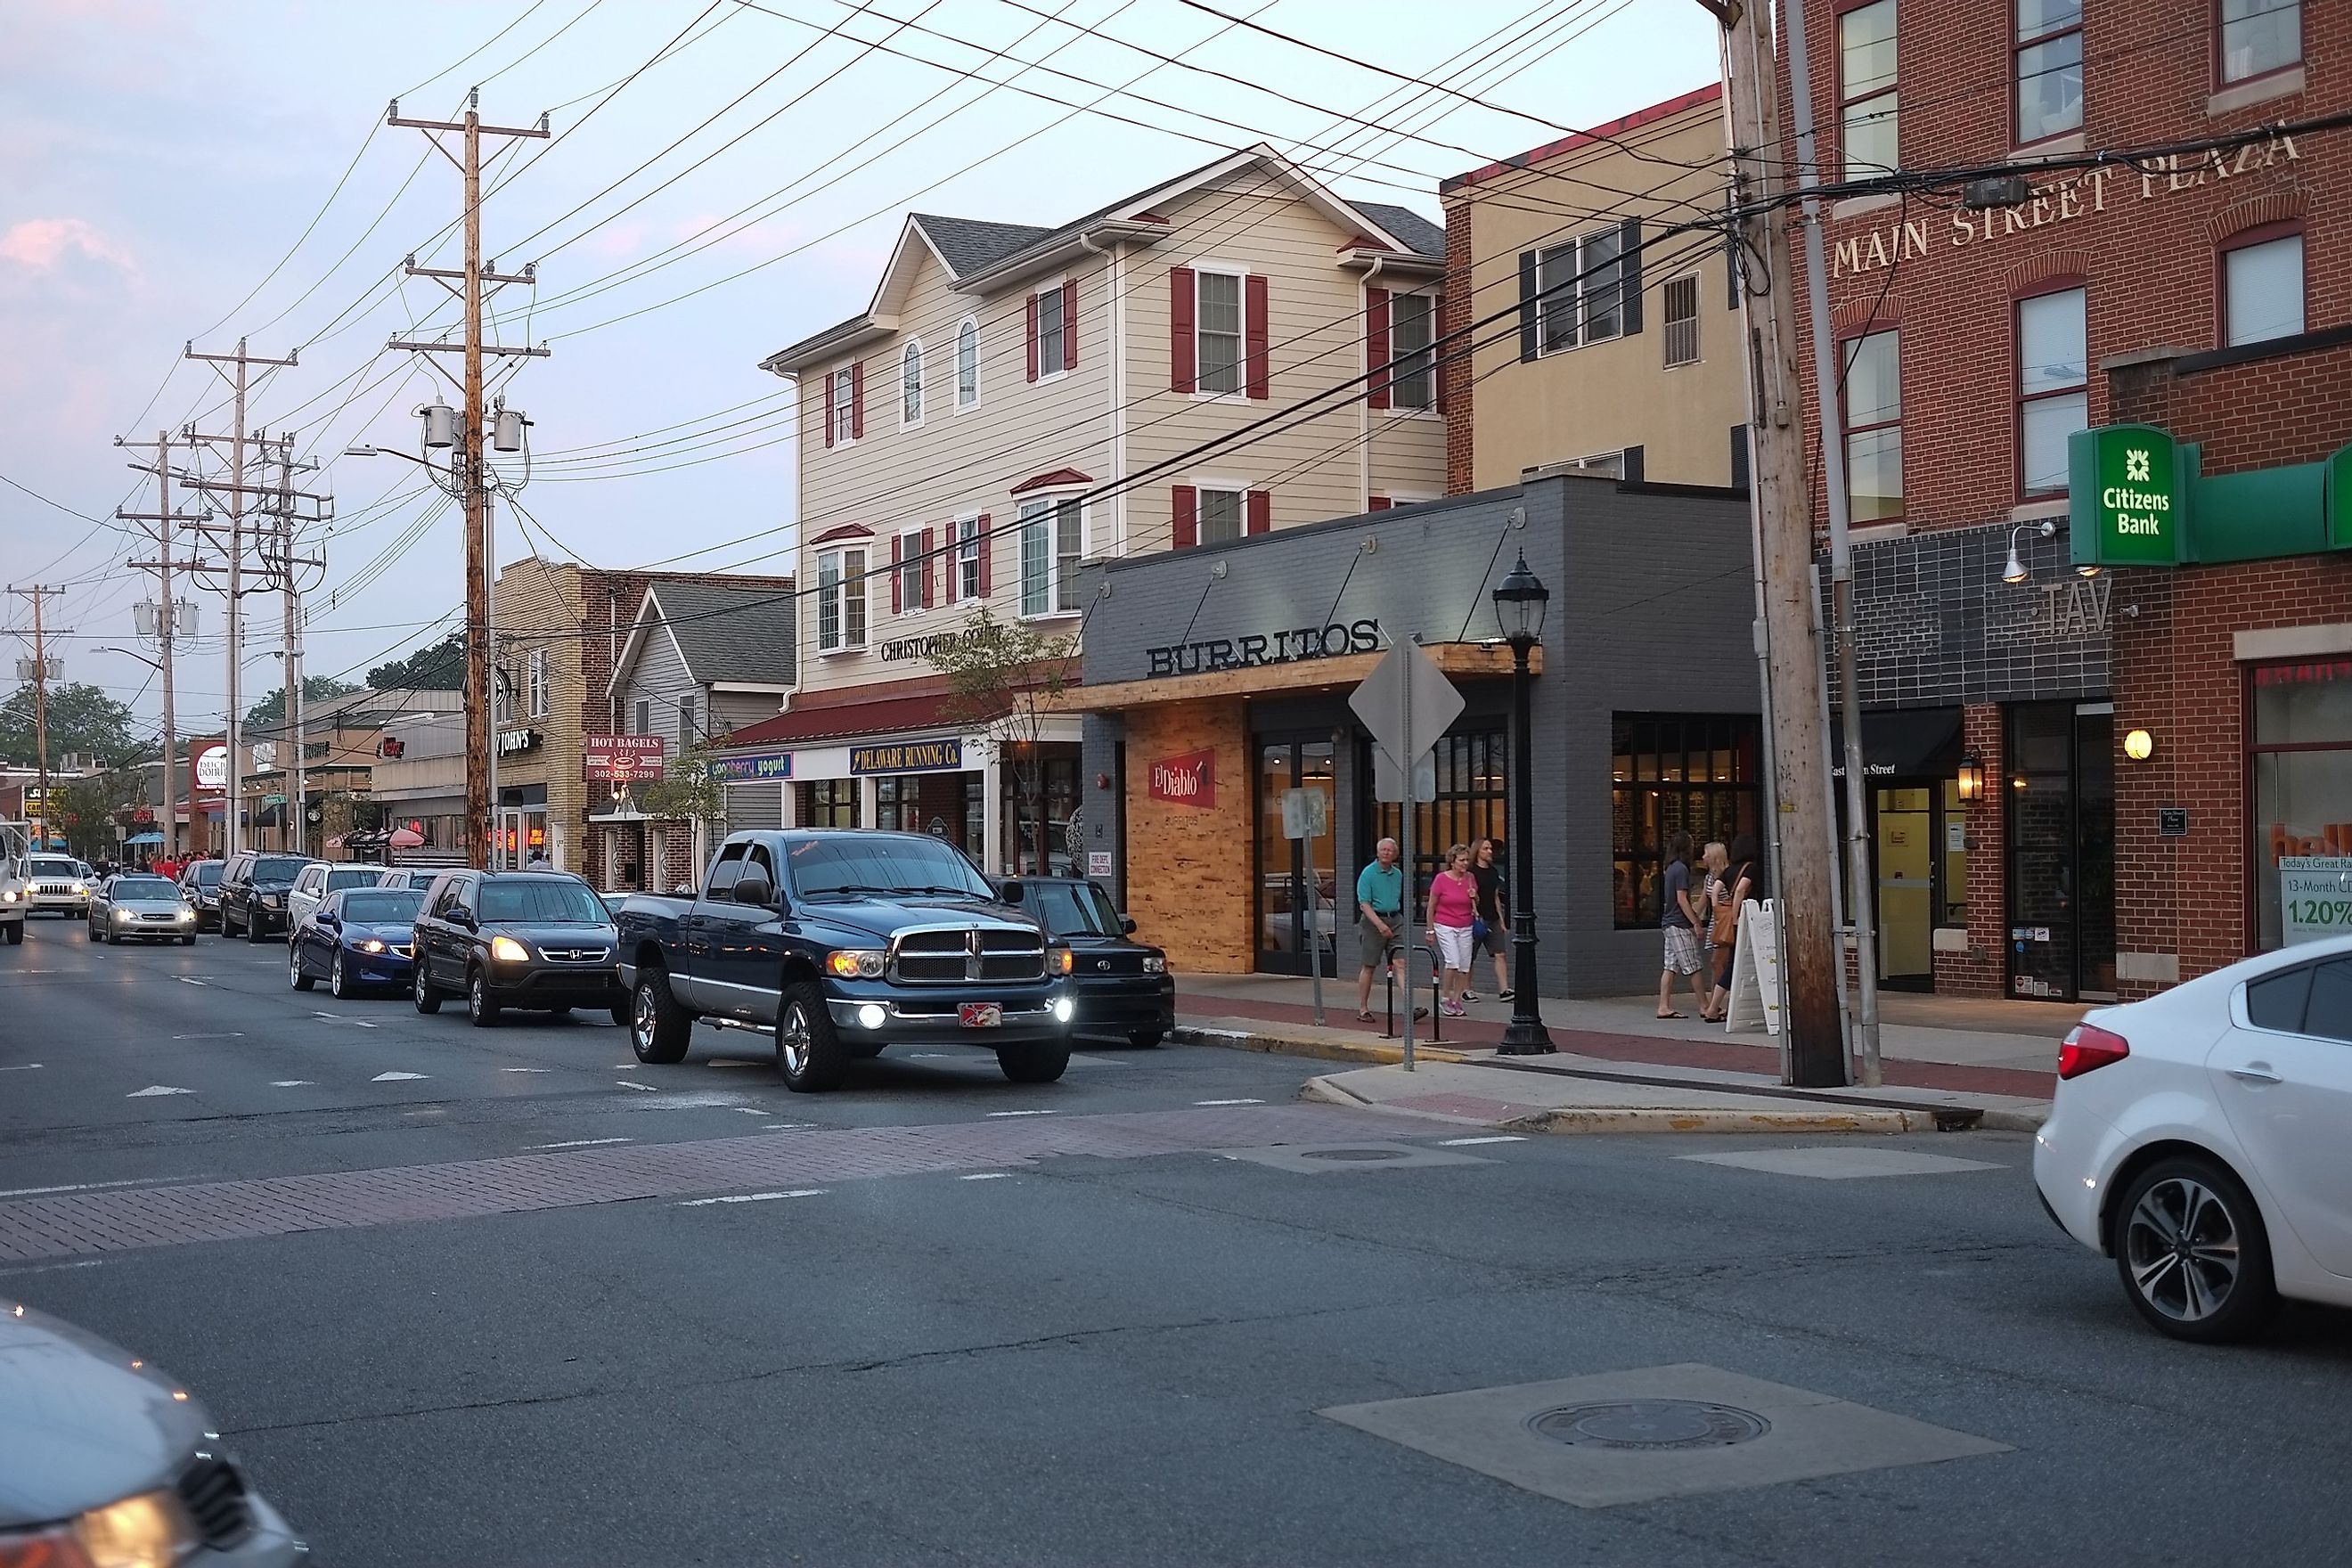 Downtown street in Newark, Delaware. Image credit pasa47, CC BY 2.0 <https://creativecommons.org/licenses/by/2.0>, via Wikimedia Commons